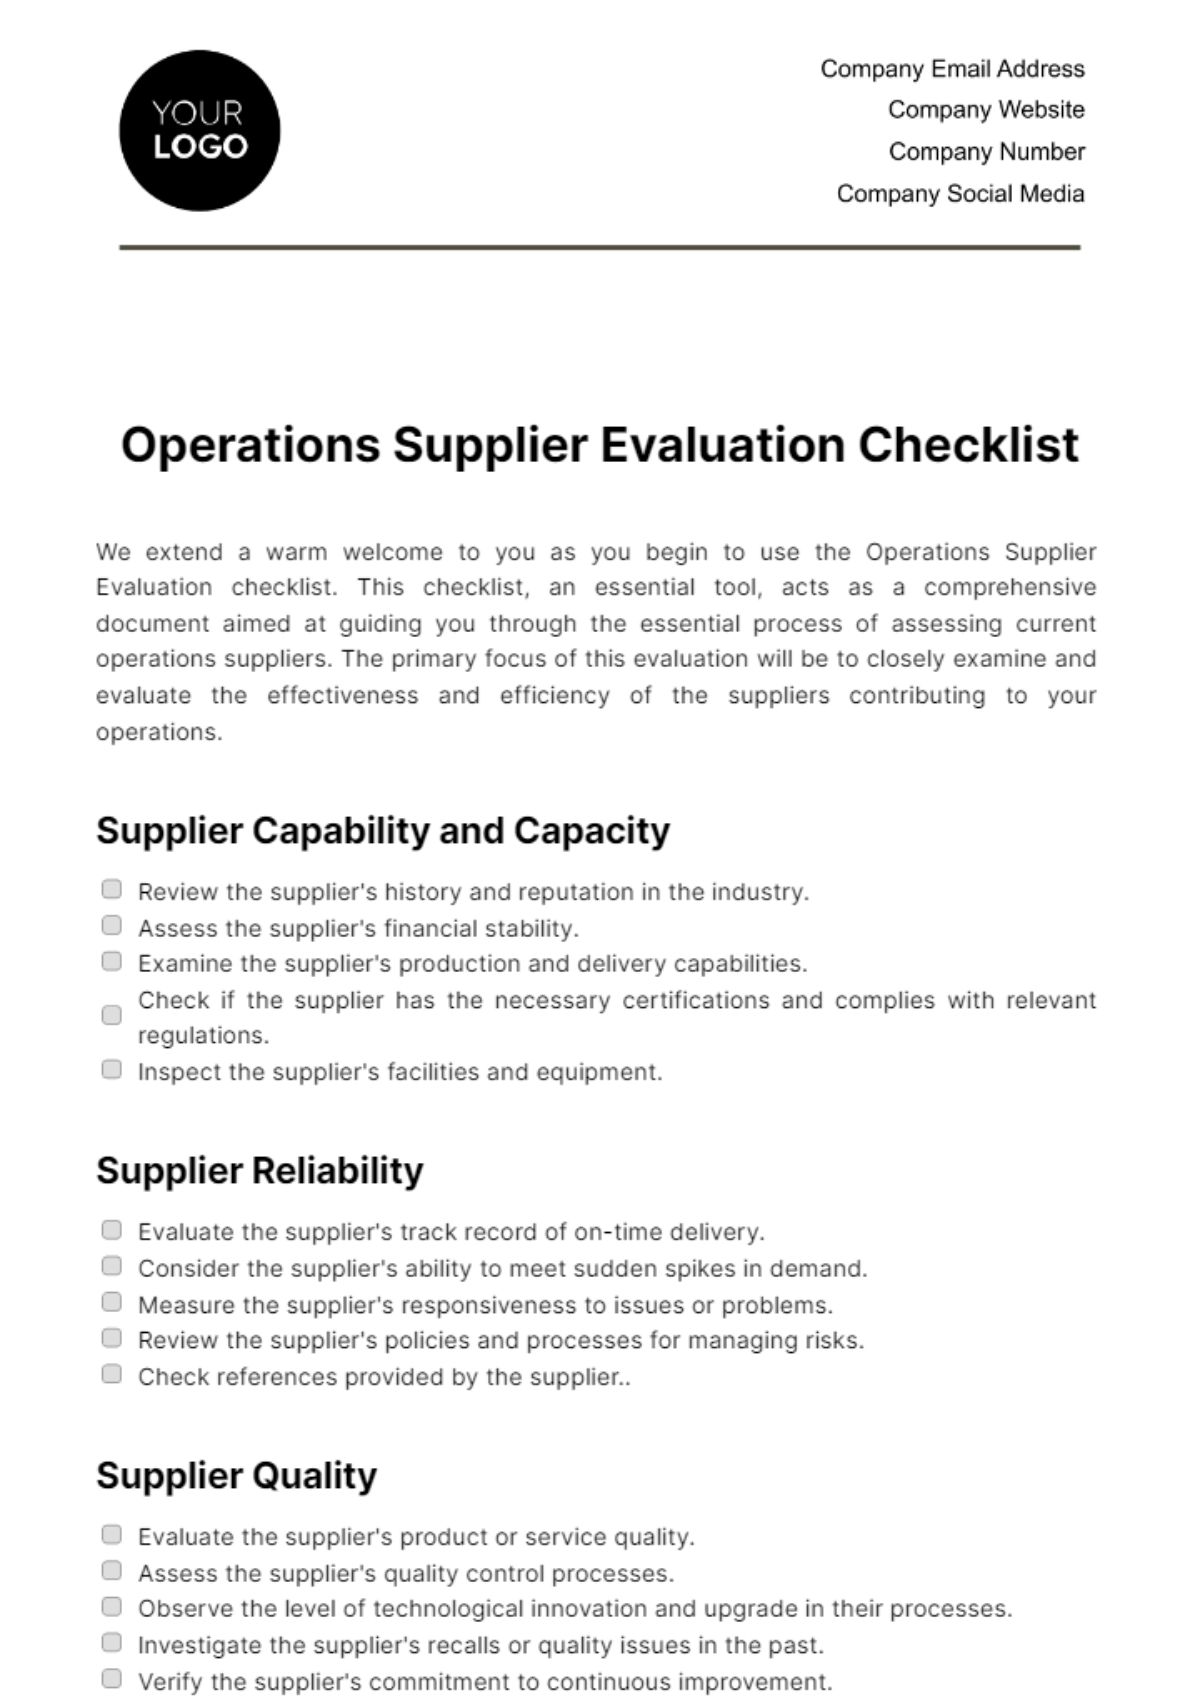 Free Operations Supplier Evaluation Checklist Template